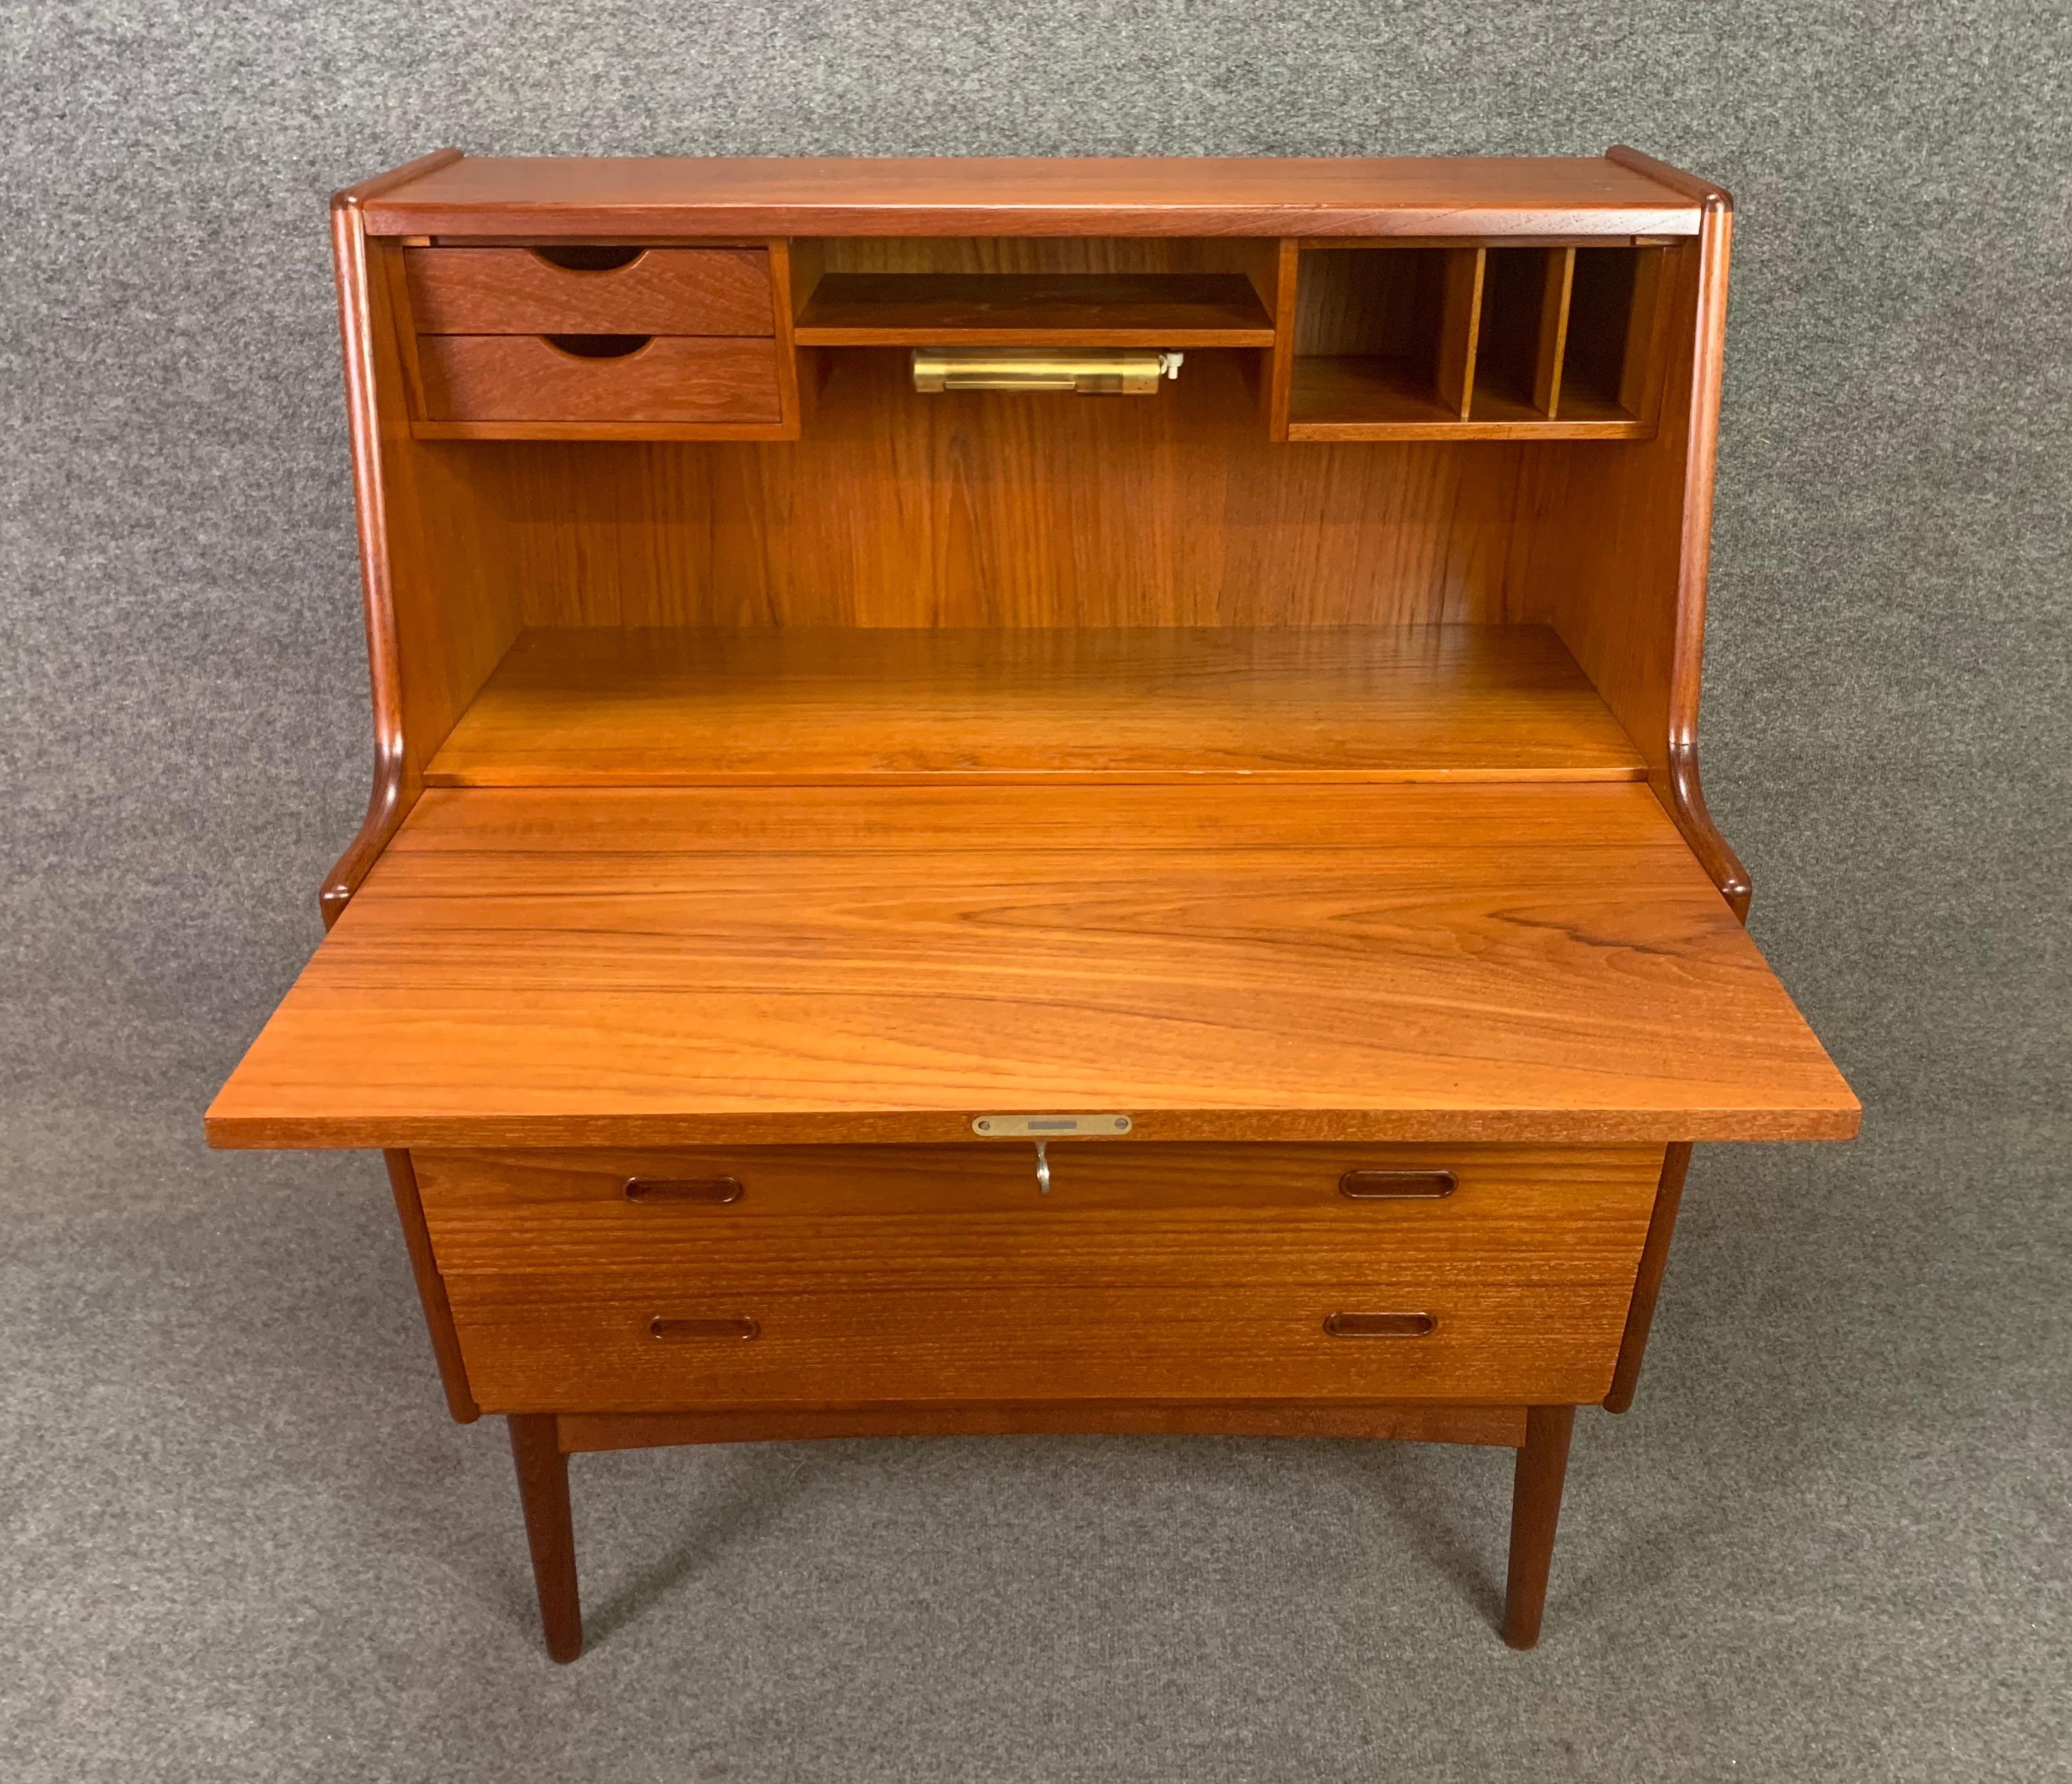 Here is a beautiful Scandinavian Modern teak secretary desk designed by Arne Walh Iversen and manufactured by Vinde Mobelfabrik in Denmark in the 1960s.
This sculptural case piece, recently imported from Copenhagen to California before its